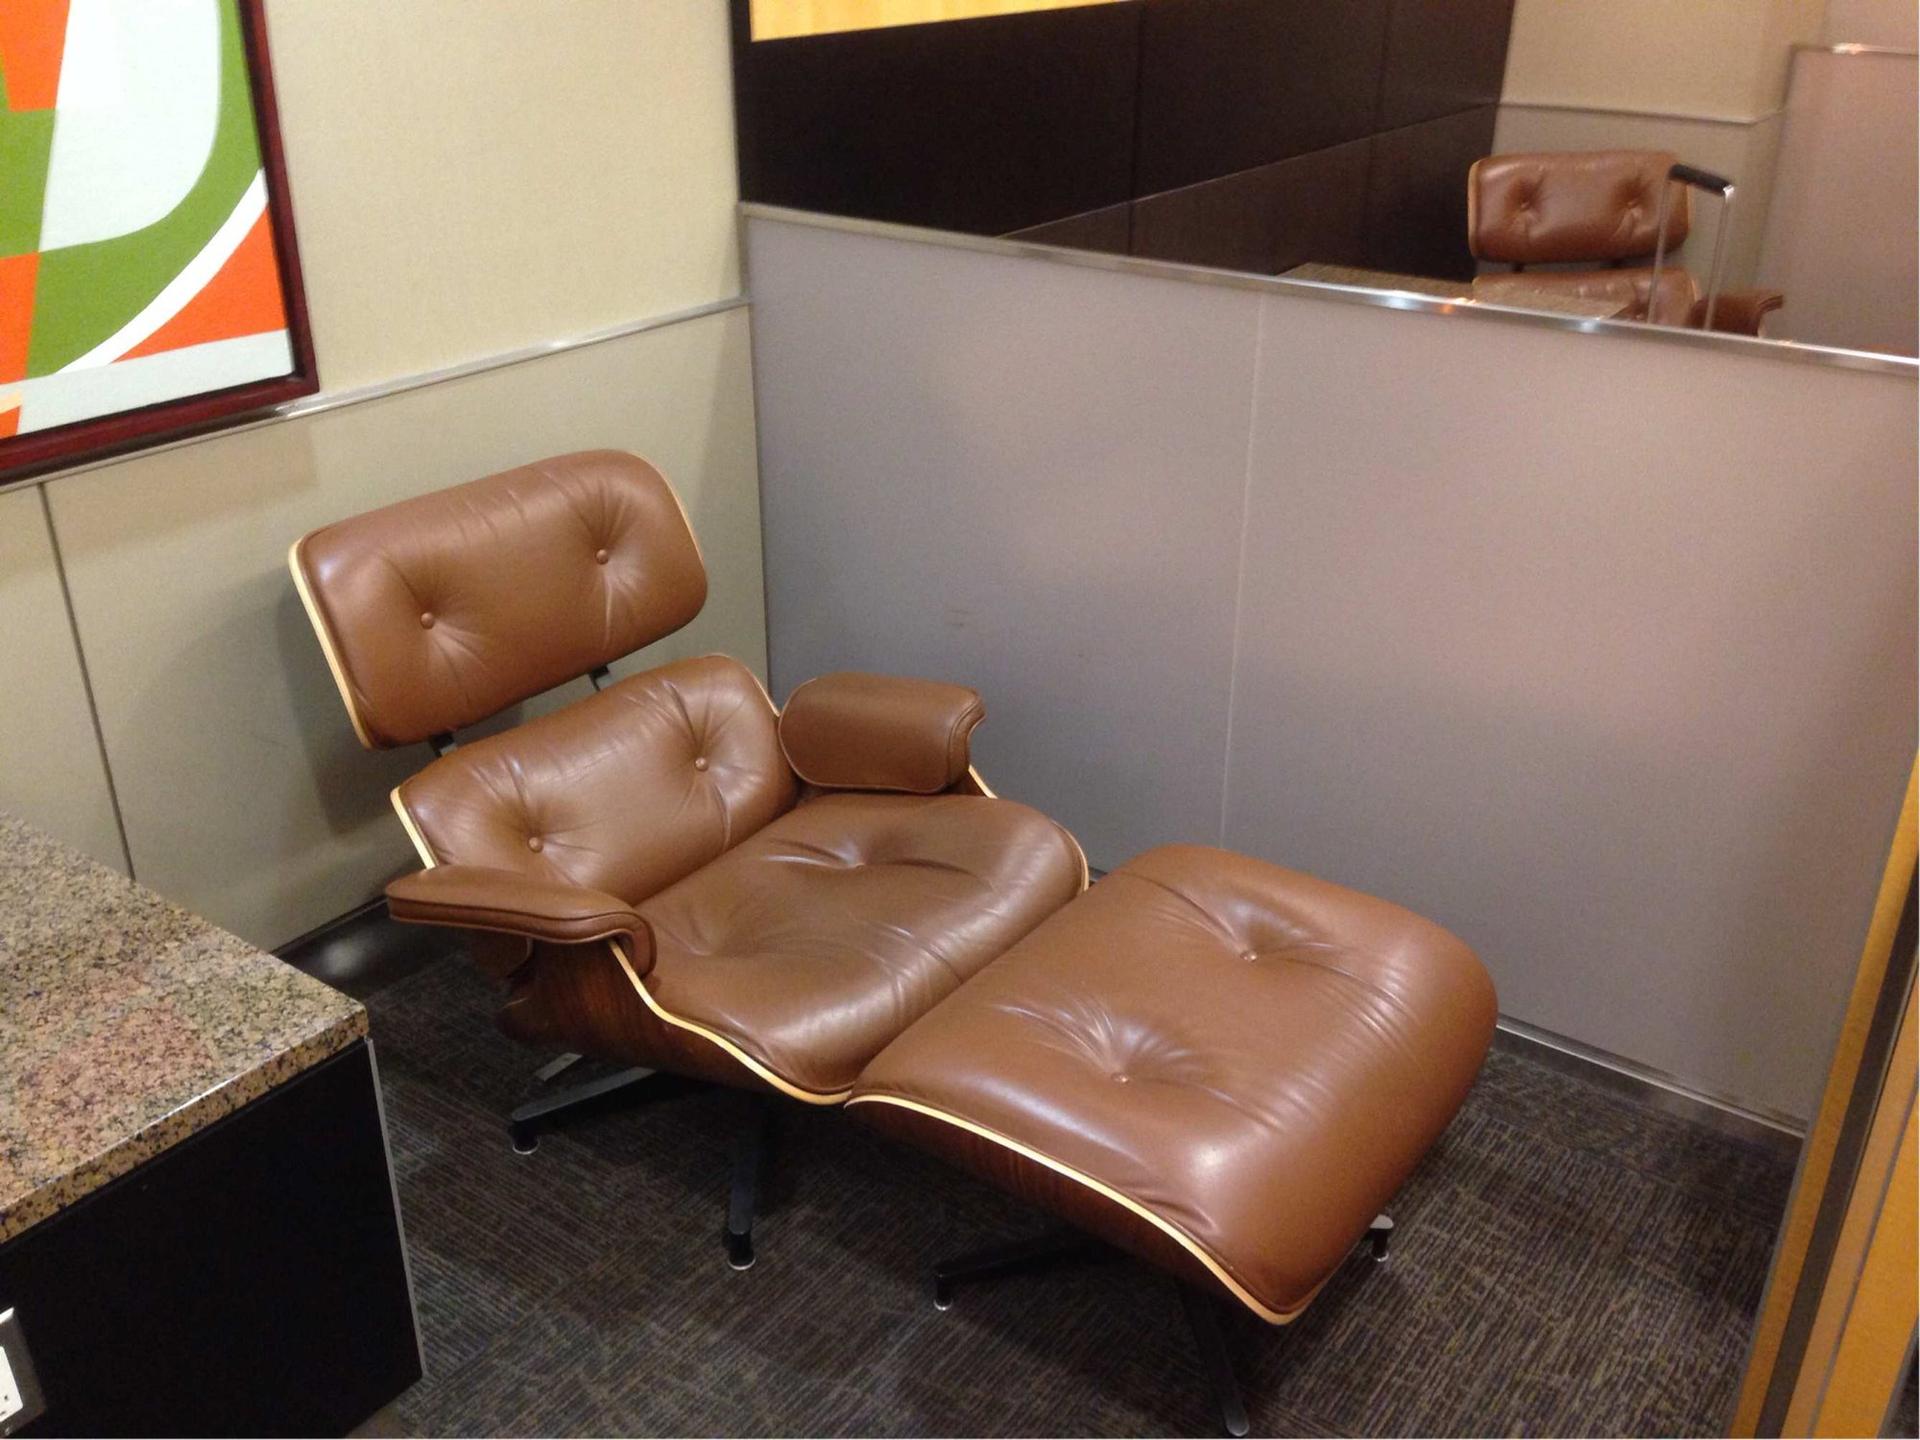 American Airlines Admirals Club image 9 of 25